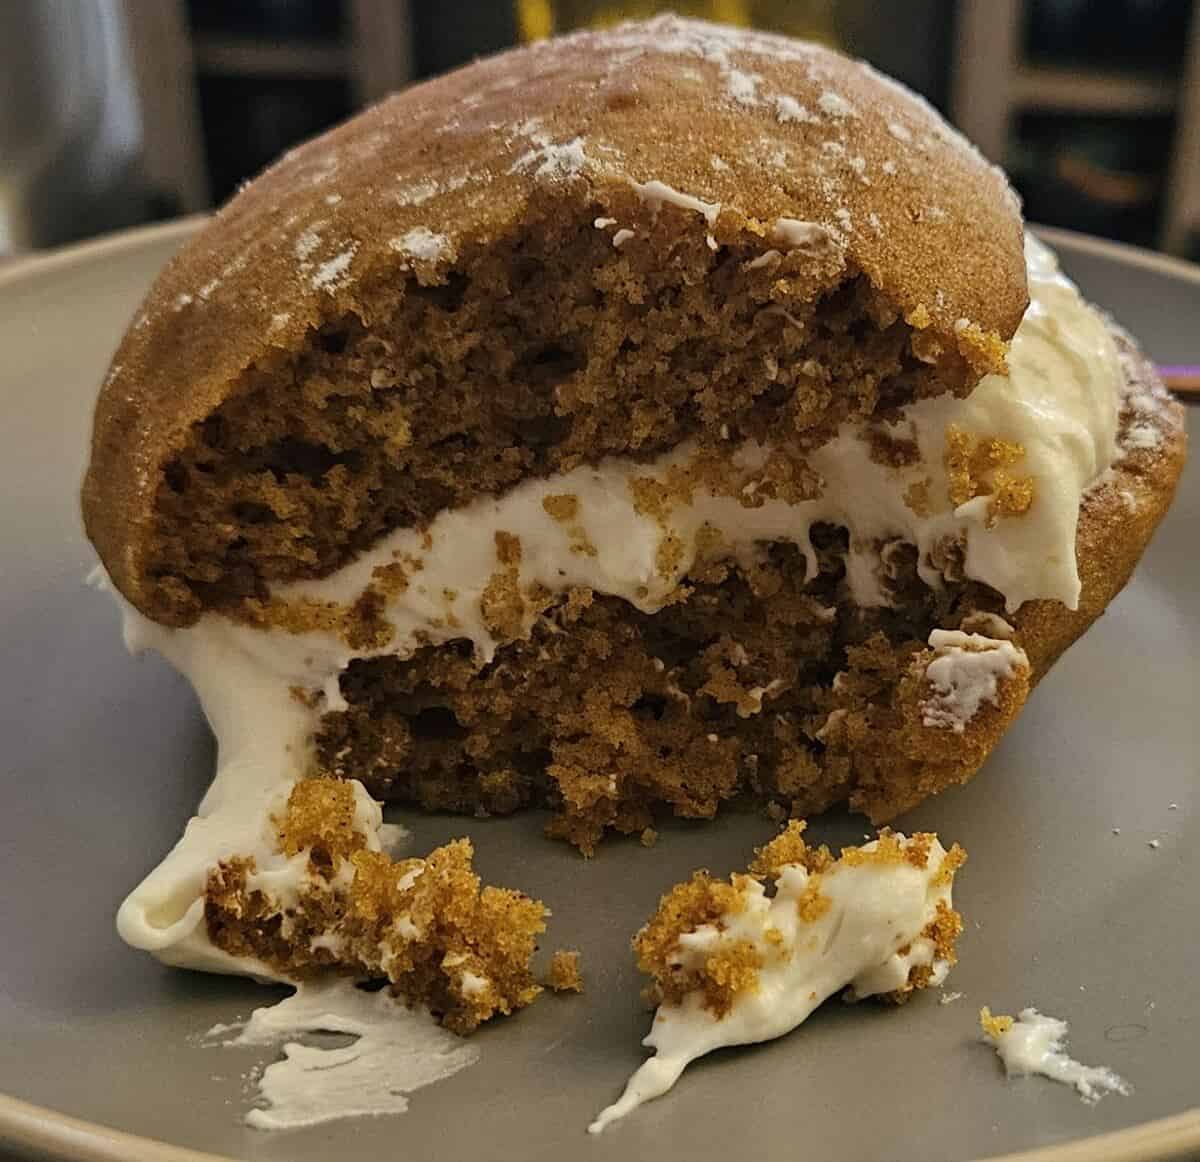 close up of finished whoopie pie cake sandwich, with a bite taken out, showing delicate cake crumbs and soft flowing cream cheese filling